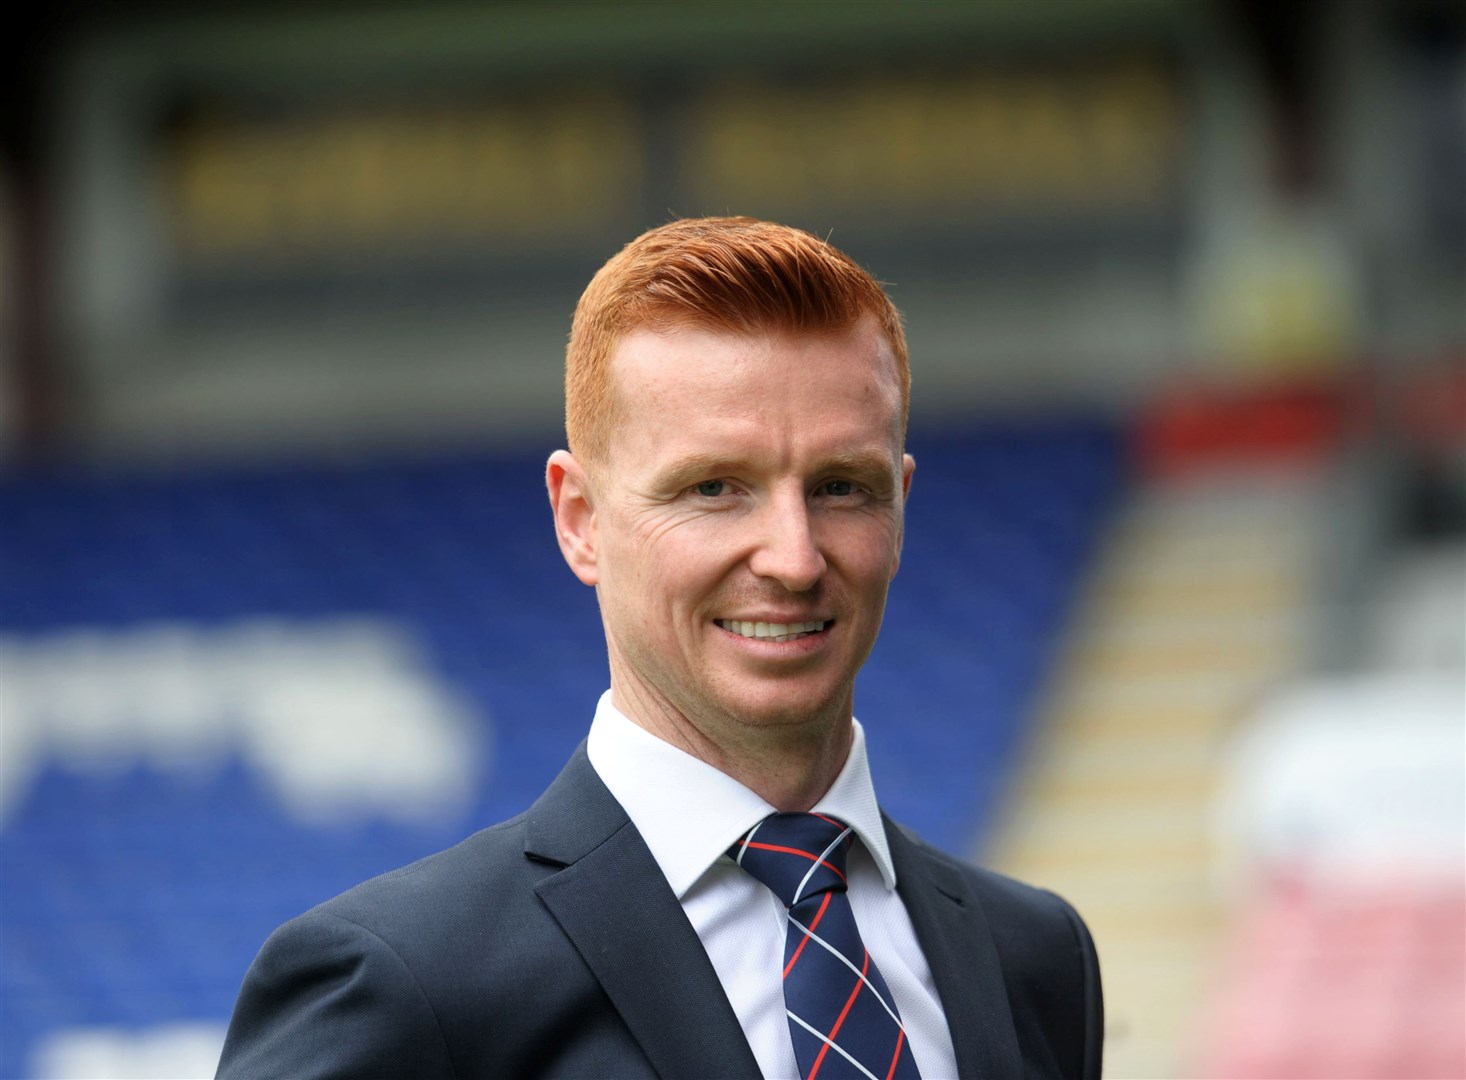 Ross County FC sporting director Scott Boyd is getting out and about in his new role with the Dingwall-based club.